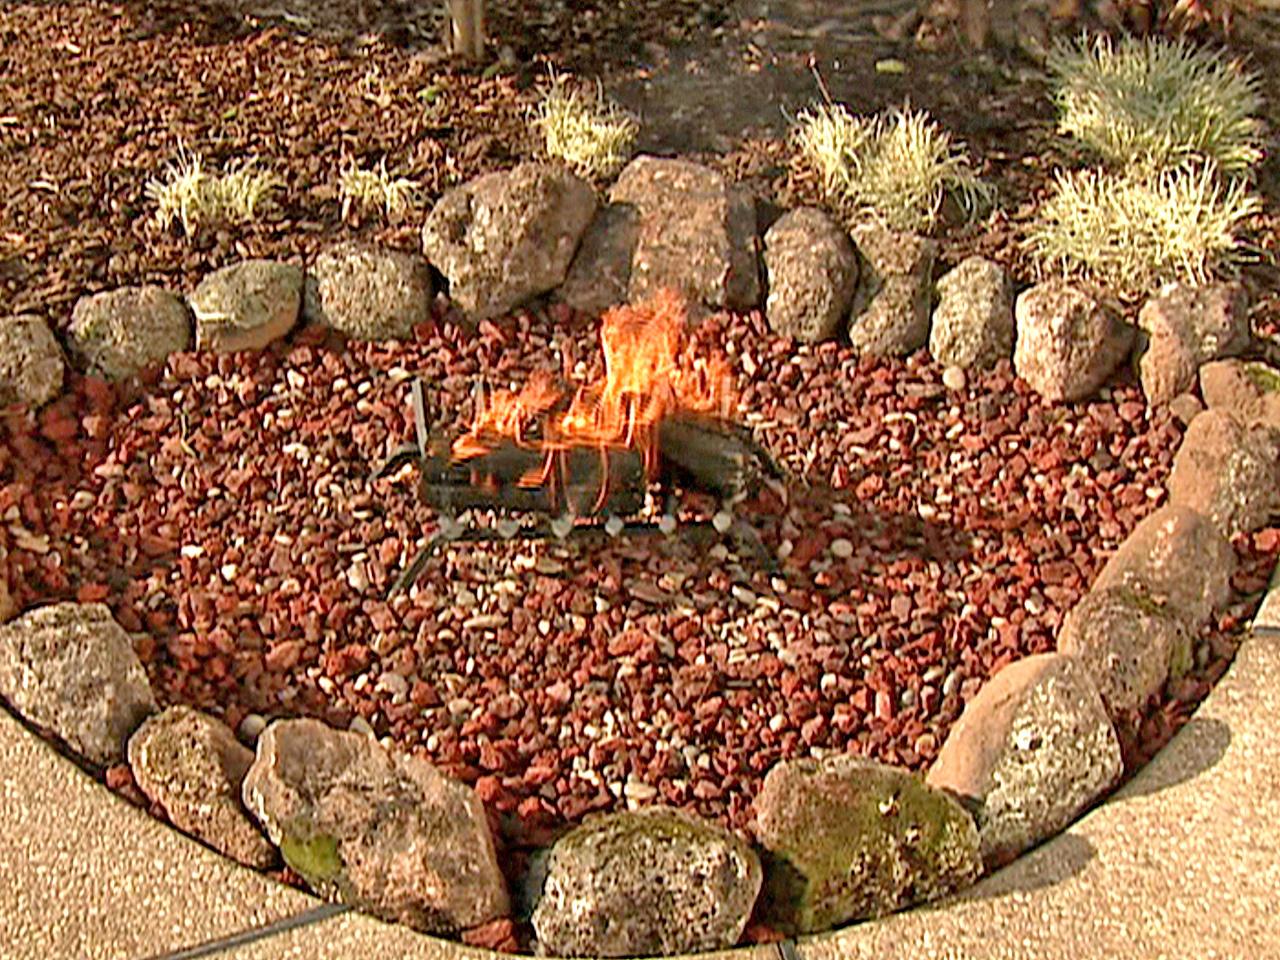 Outdoor Fire Pits And Pit Safety, What Stones Are Safe For A Fire Pit